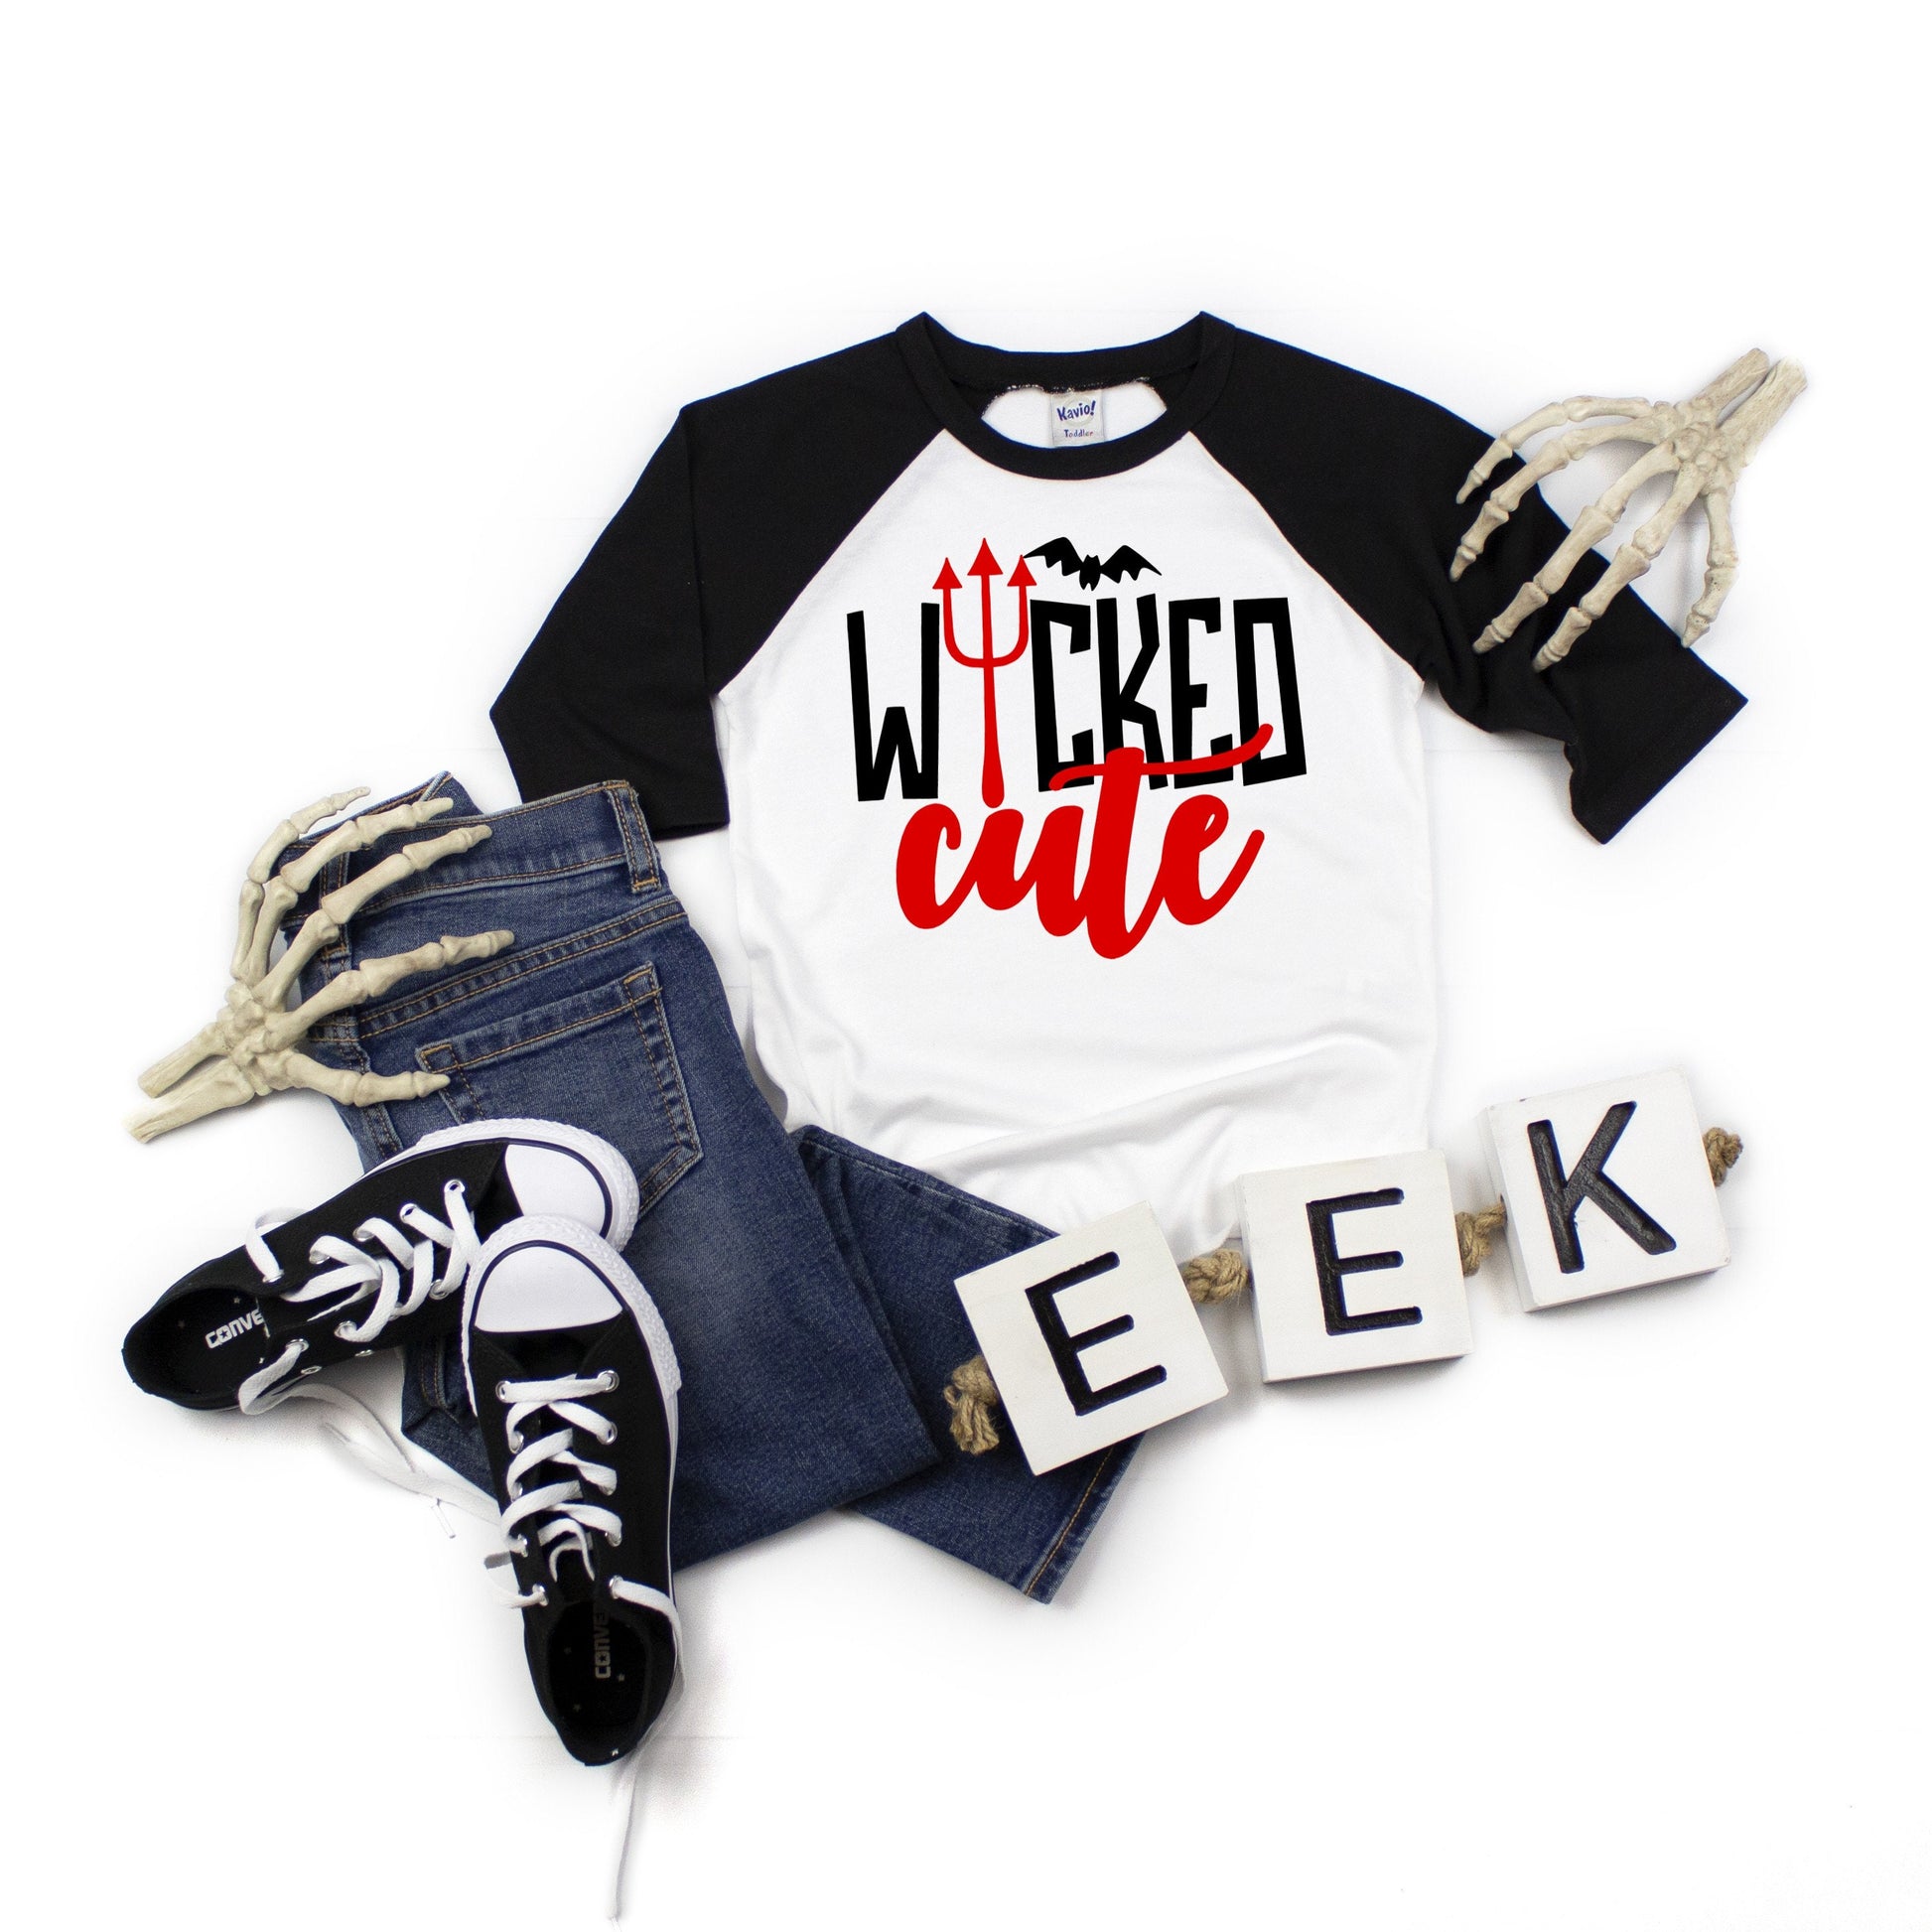 Wicked Cute Infant, Toddler or Kids Halloween Raglan Tee - kids halloween shirt - halloween toddler shirt - girl halloween shirt - fall tee